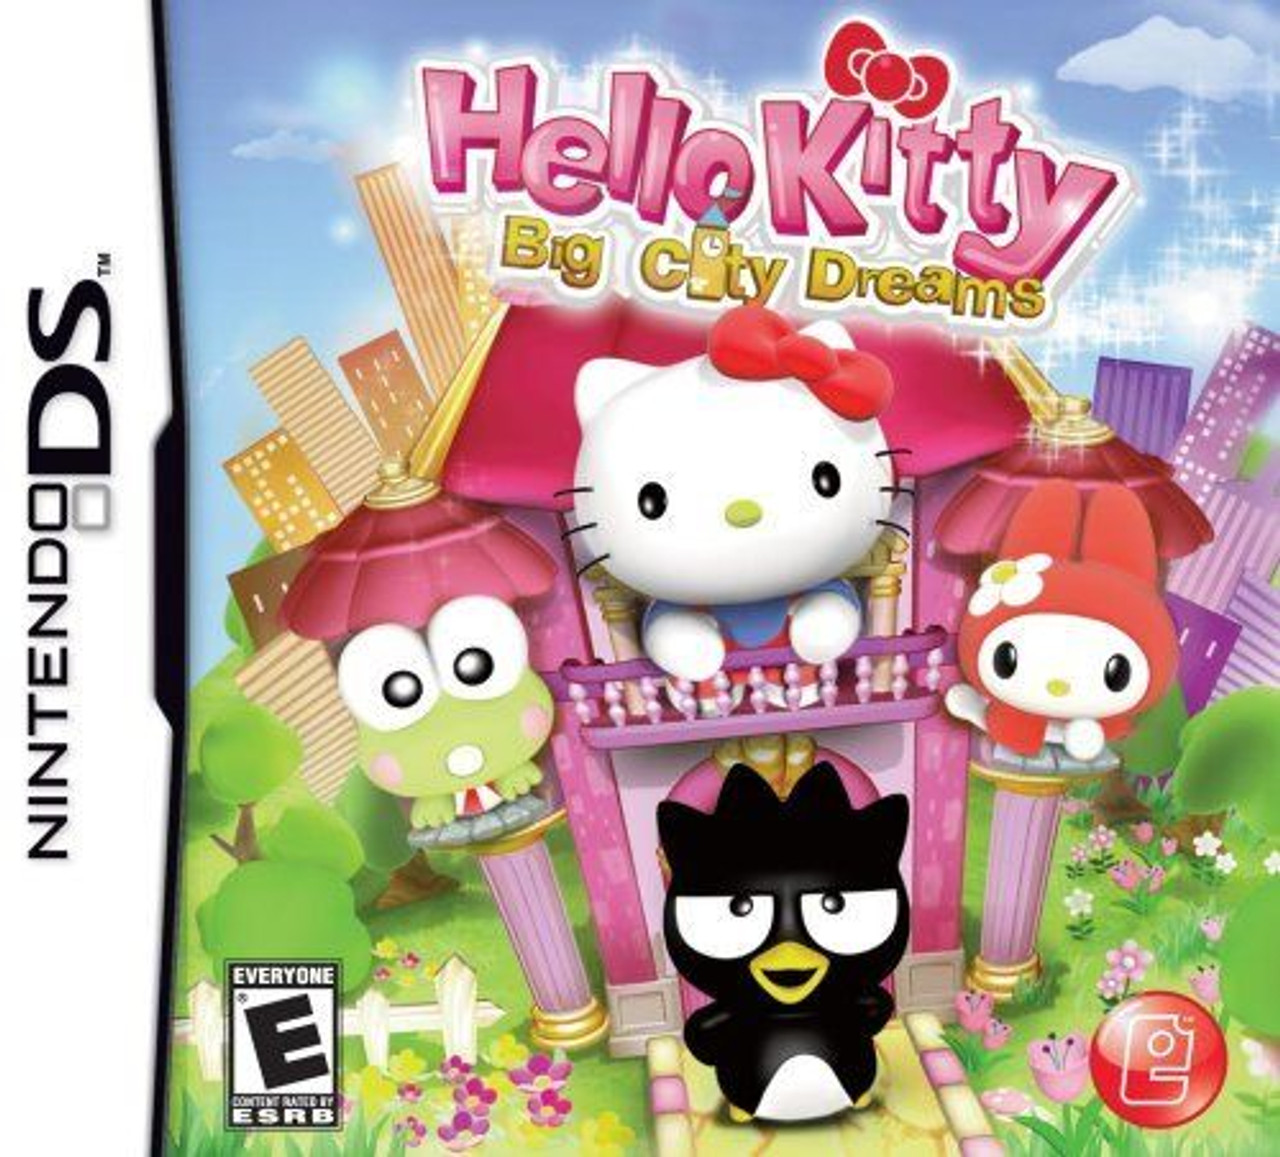  Hello  Kitty  Big City Dreams DS Game  Nintendo DS Game  For 